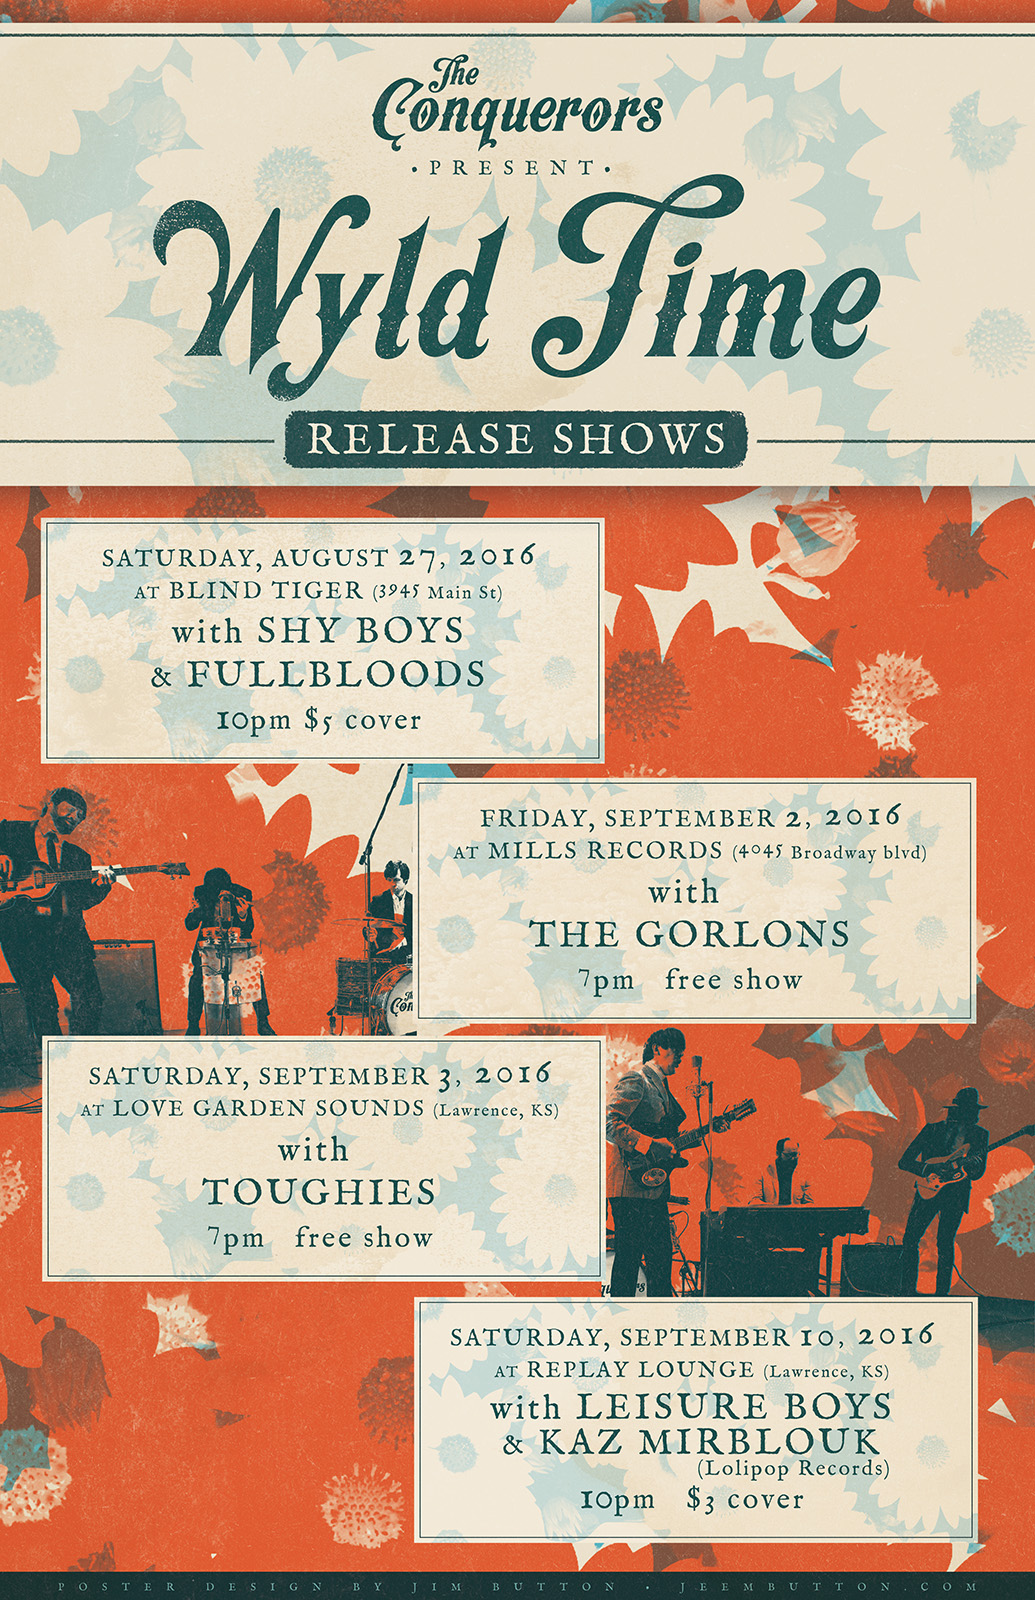 The Conquerors Schedule Local Release Shows For New Lp Wyld Time